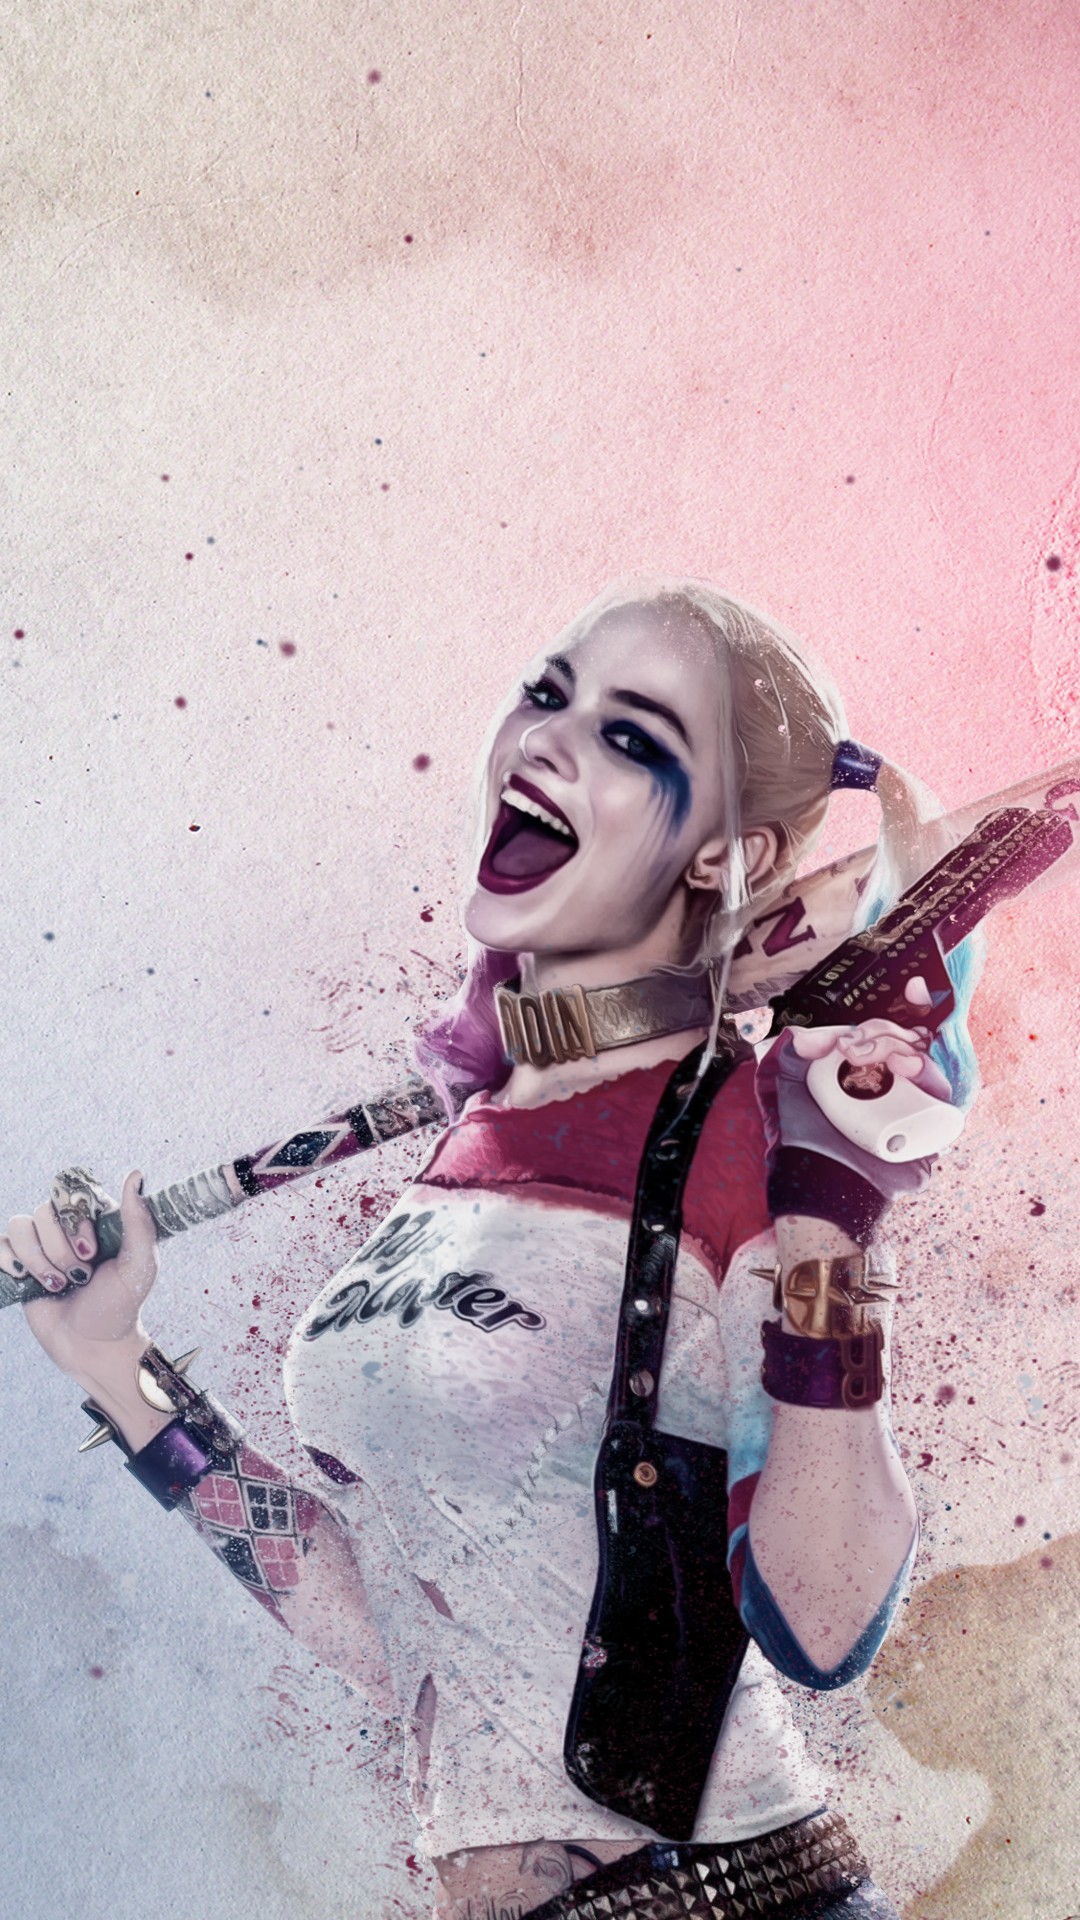 Harley Quinn Movie iPhone 6 Wallpaper with image resolution 1080x1920 pixel. You can use this wallpaper as background for your desktop Computer Screensavers, Android or iPhone smartphones